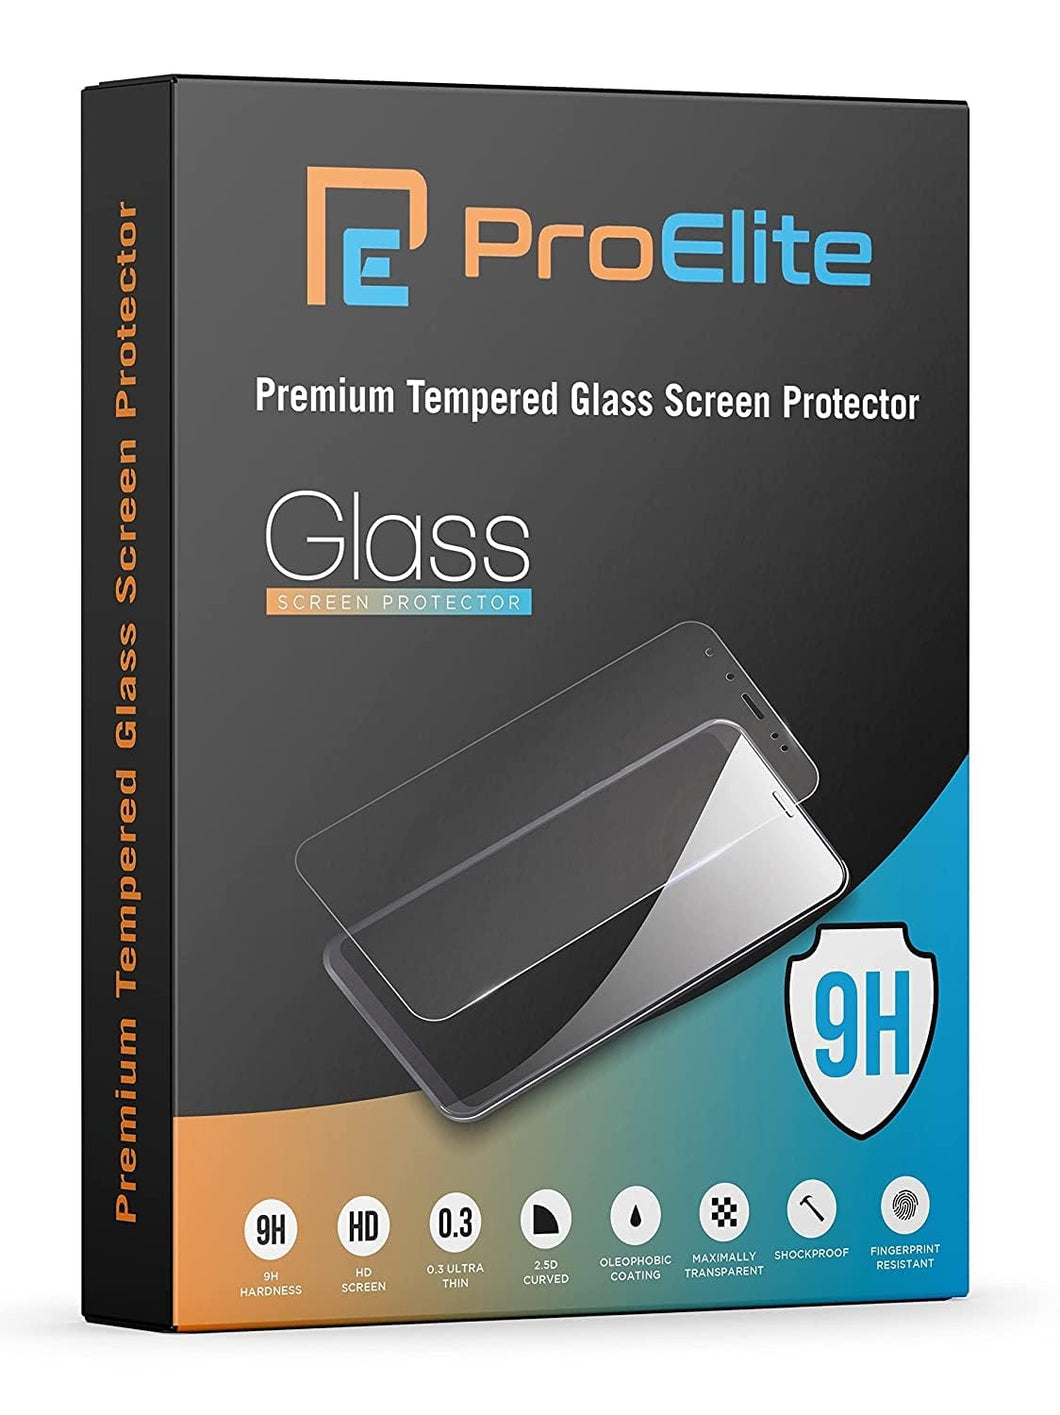 [2-Pack] ProElite Premium Tempered Glass Screen Protector for Lenovo Tab M10 HD 2nd Gen (TB-X306X) / Smart Tab M10 HD 2nd Gen (TB-X306F) 10.1 Inch